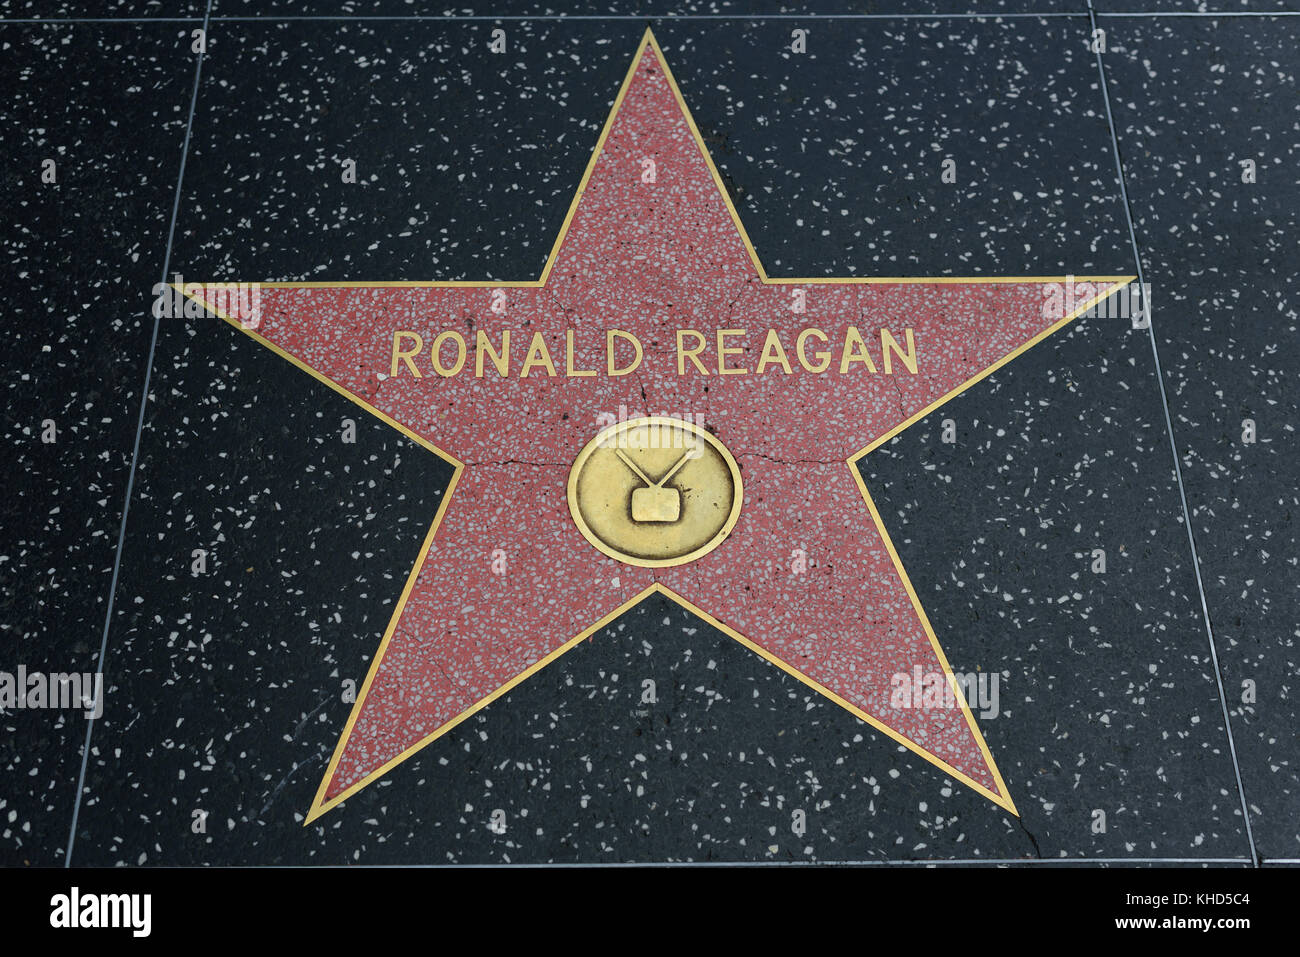 HOLLYWOOD, CA - DECEMBER 06: Ronald Reagan star on the Hollywood Walk of Fame in Hollywood, California on Dec. 6, 2016. Stock Photo